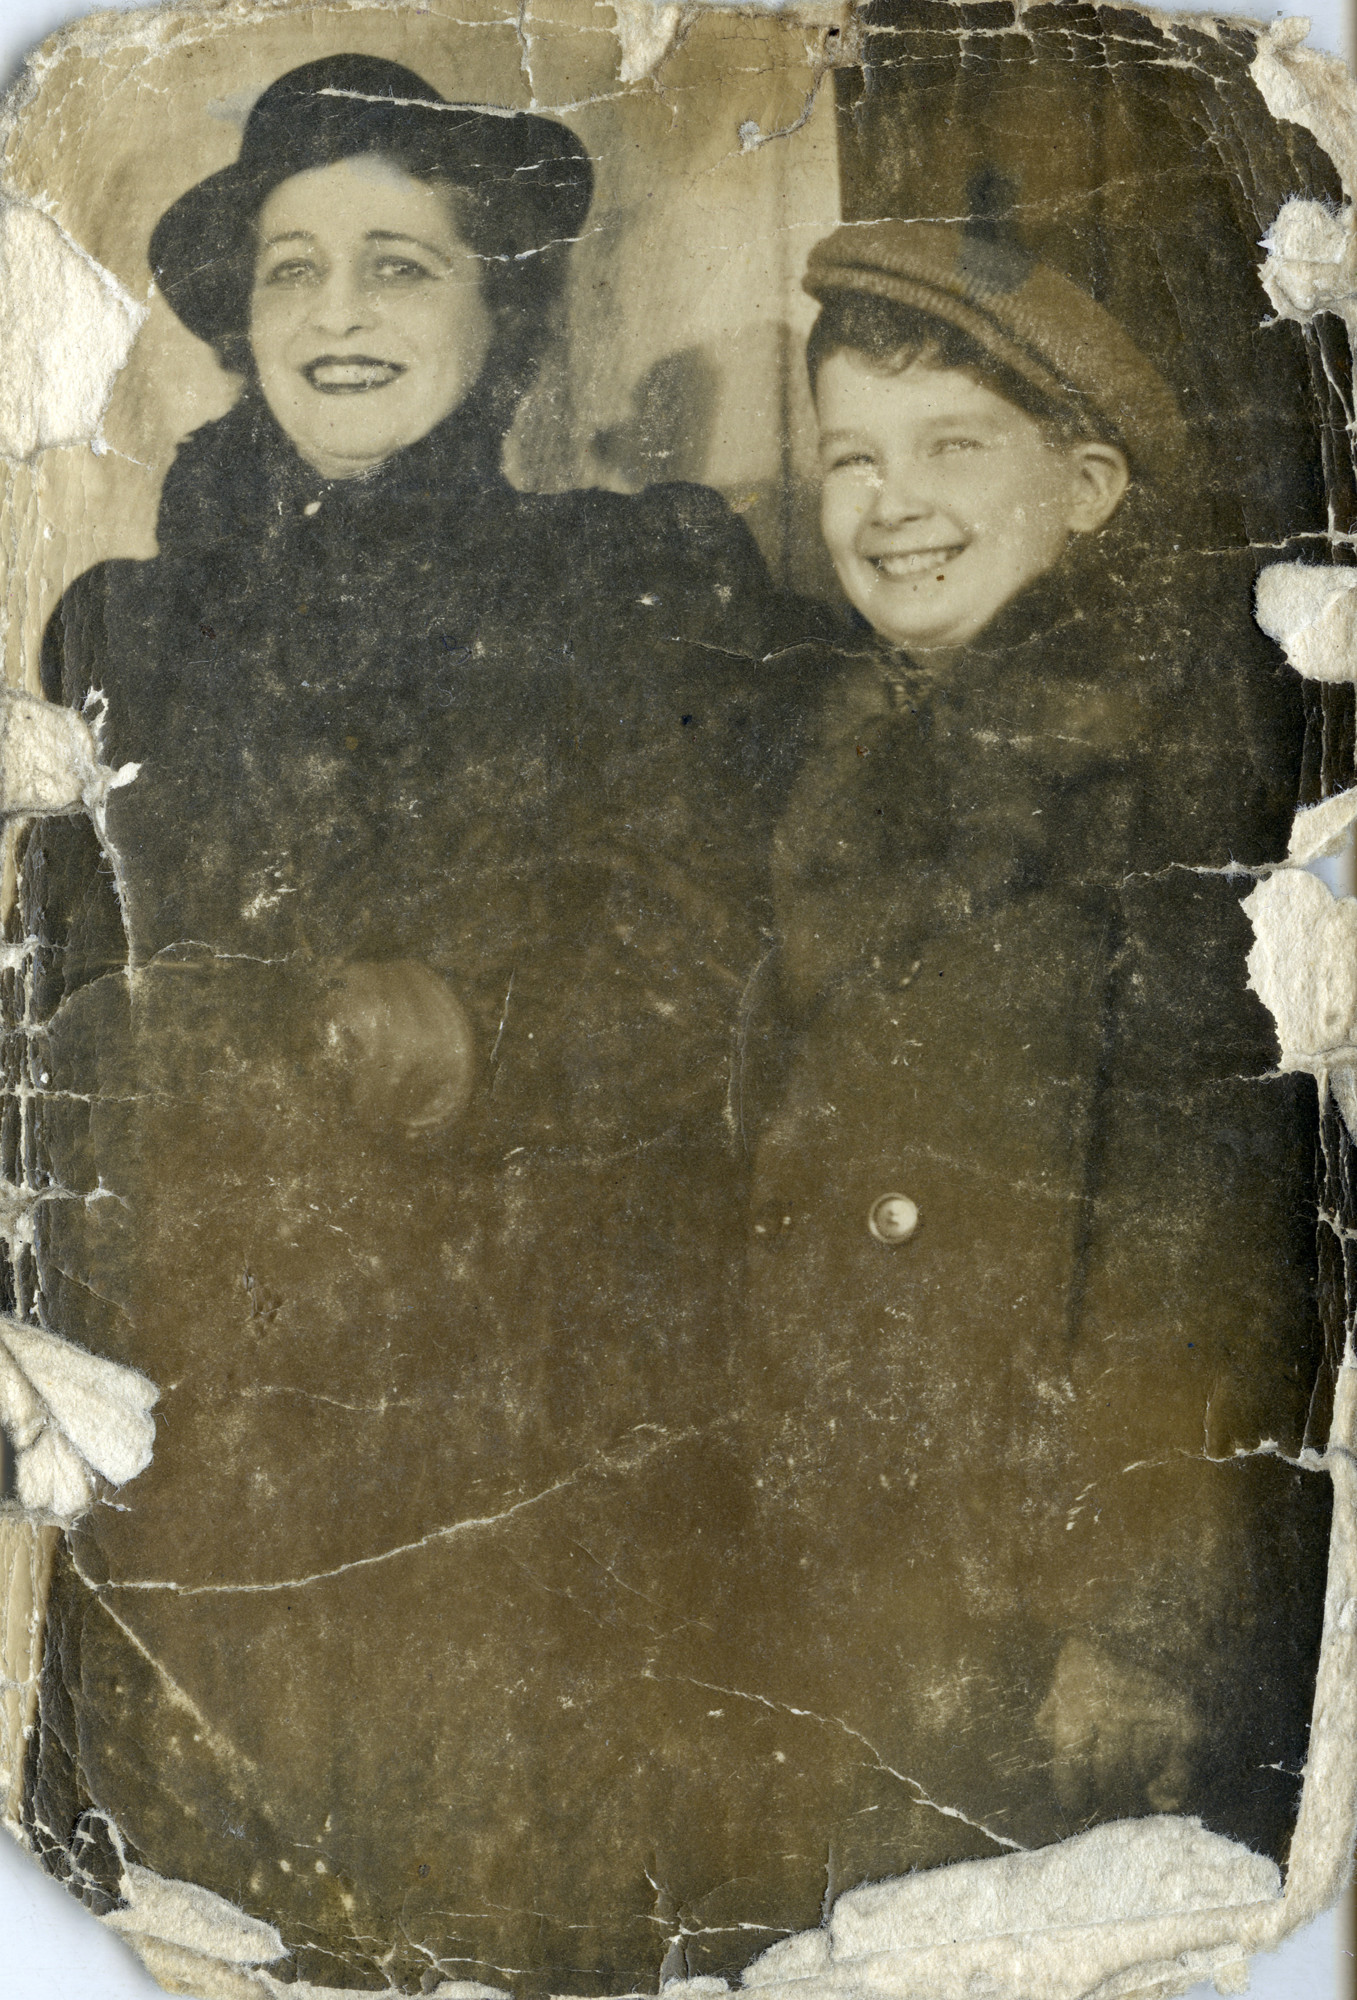 Sula Graubart with her nephew.

Both perished in the Holocaust.